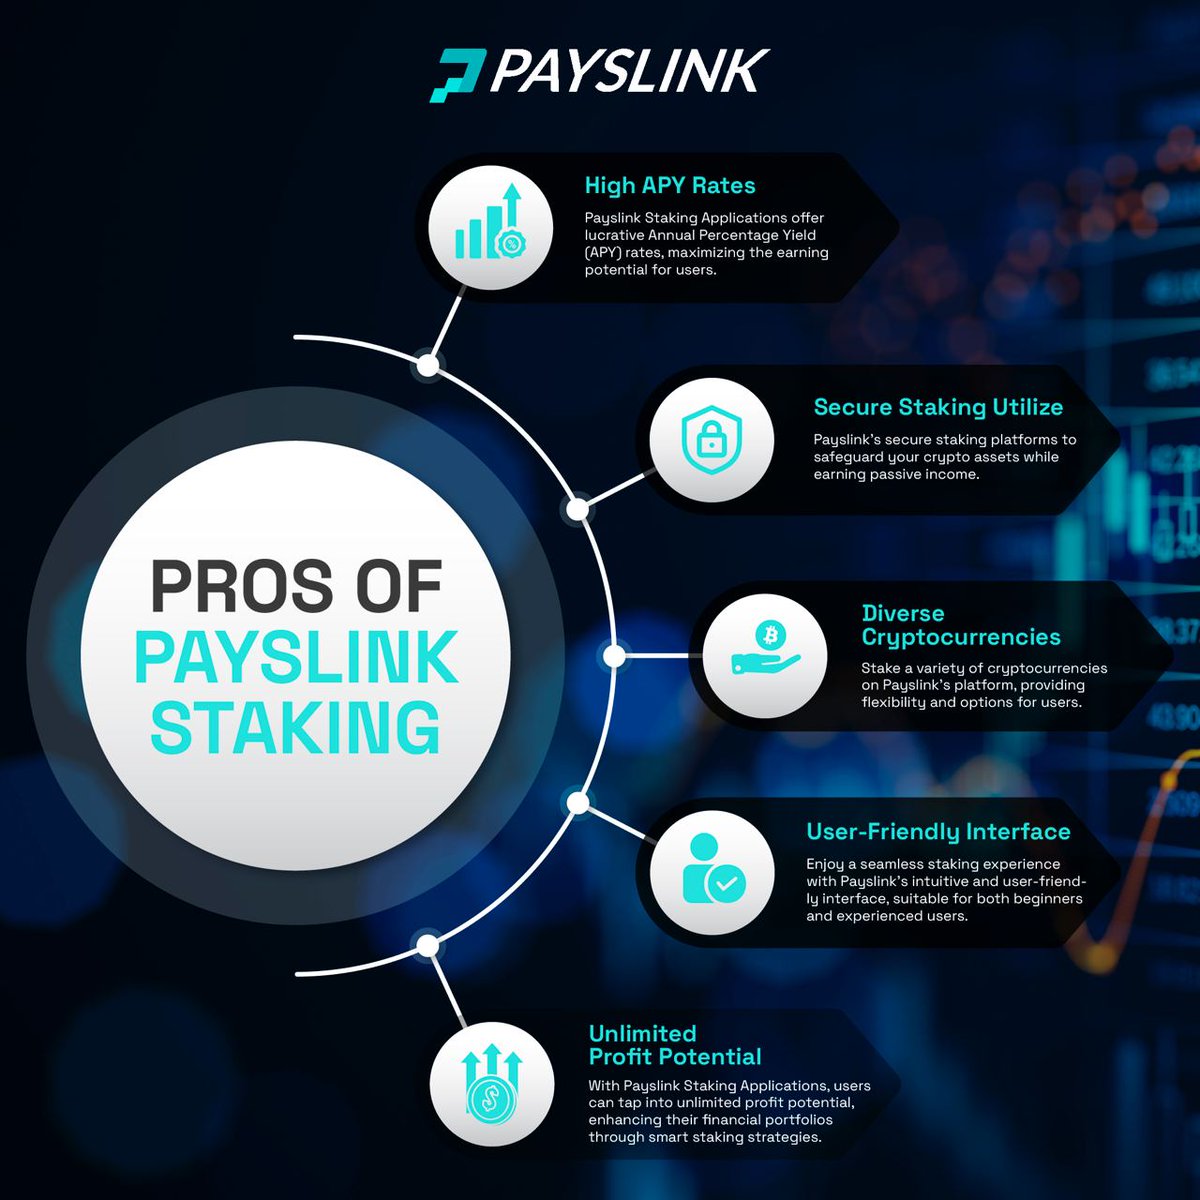 💯PROS OF PAYSLINK STAKING 🔞

🎉High APY Rates Payslink Staking Applications offer lucrative Annual Percentage Yield (APY) rates, maximizing the earning potential for users.

✨Secure Staking Utilize Payslink's secure staking platforms to safeguard your crypto assets while…